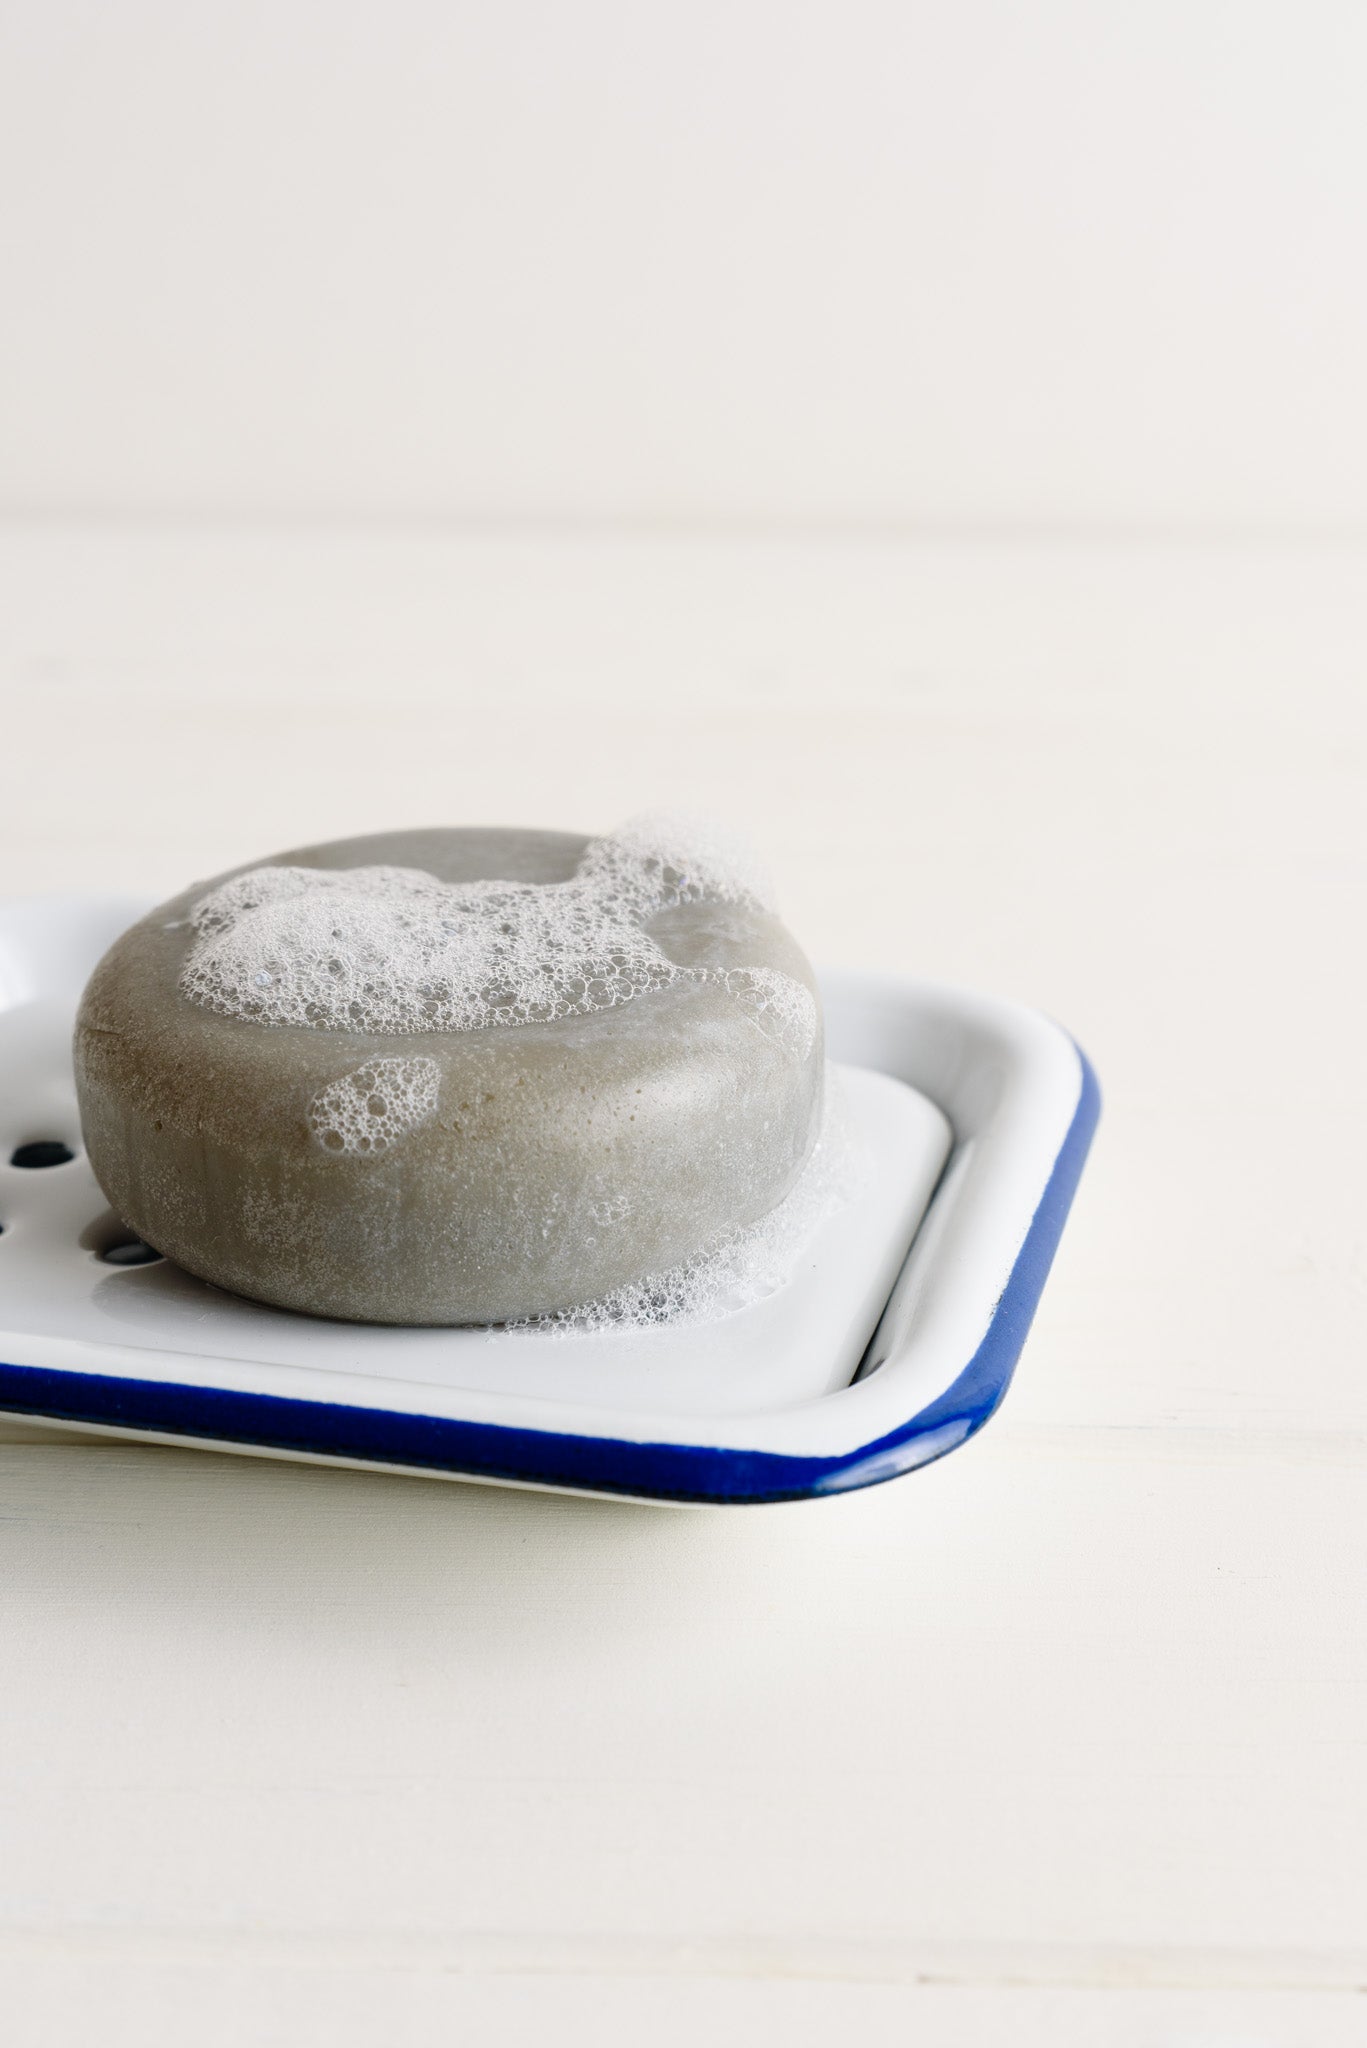 The round grey shampoo bar, foamy and bubbly, placed on an enamel tray, against on a white background